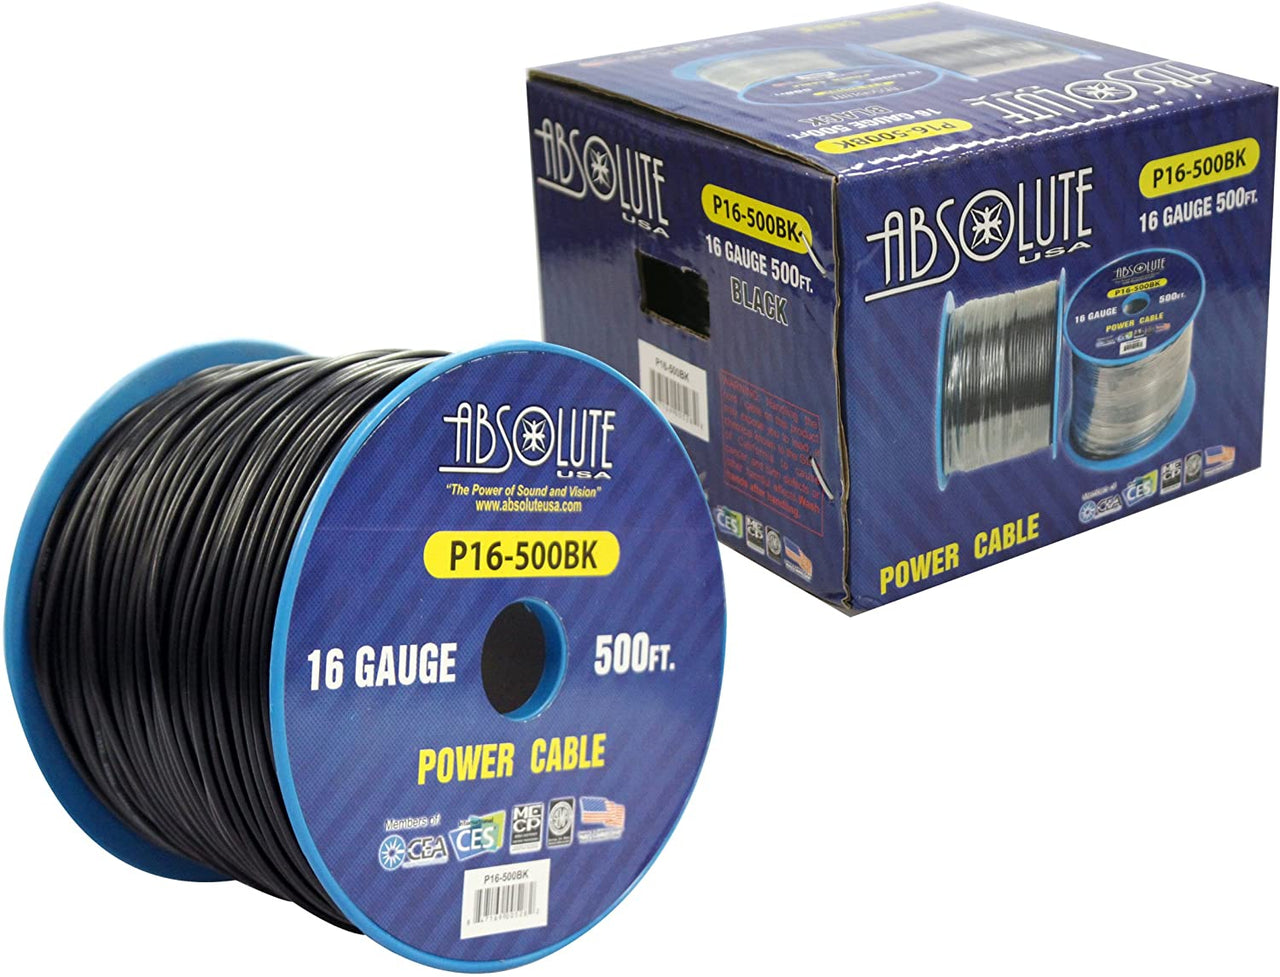 Absolute USA P16-500BK 16 Gauge 500-Feet Spool Primary Power Wire Cable (Black)